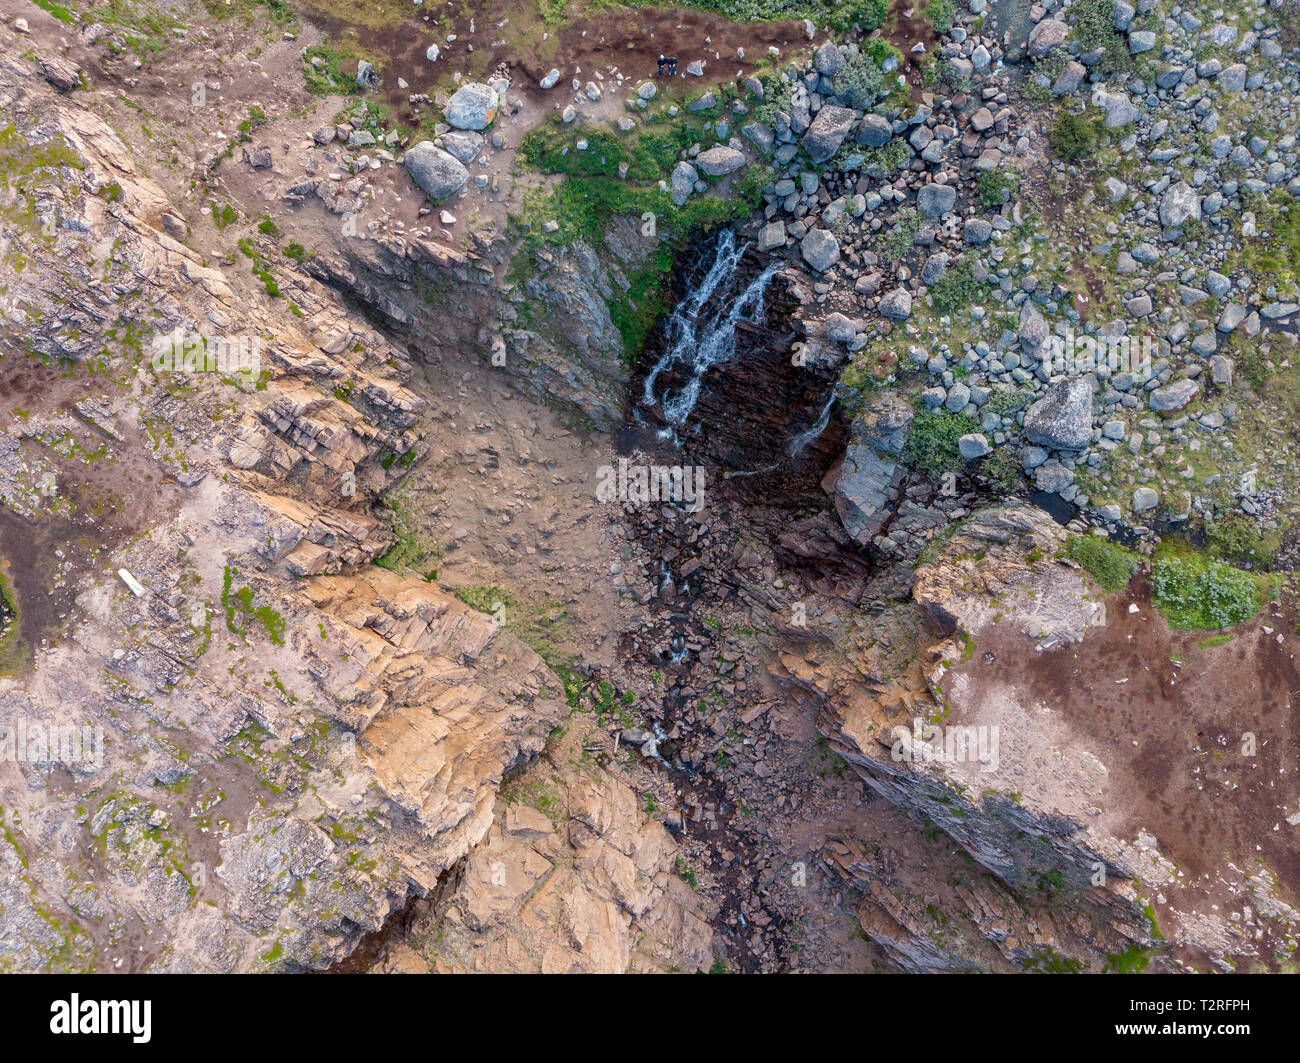 Mountain Waterfall with Drone Stock Photo